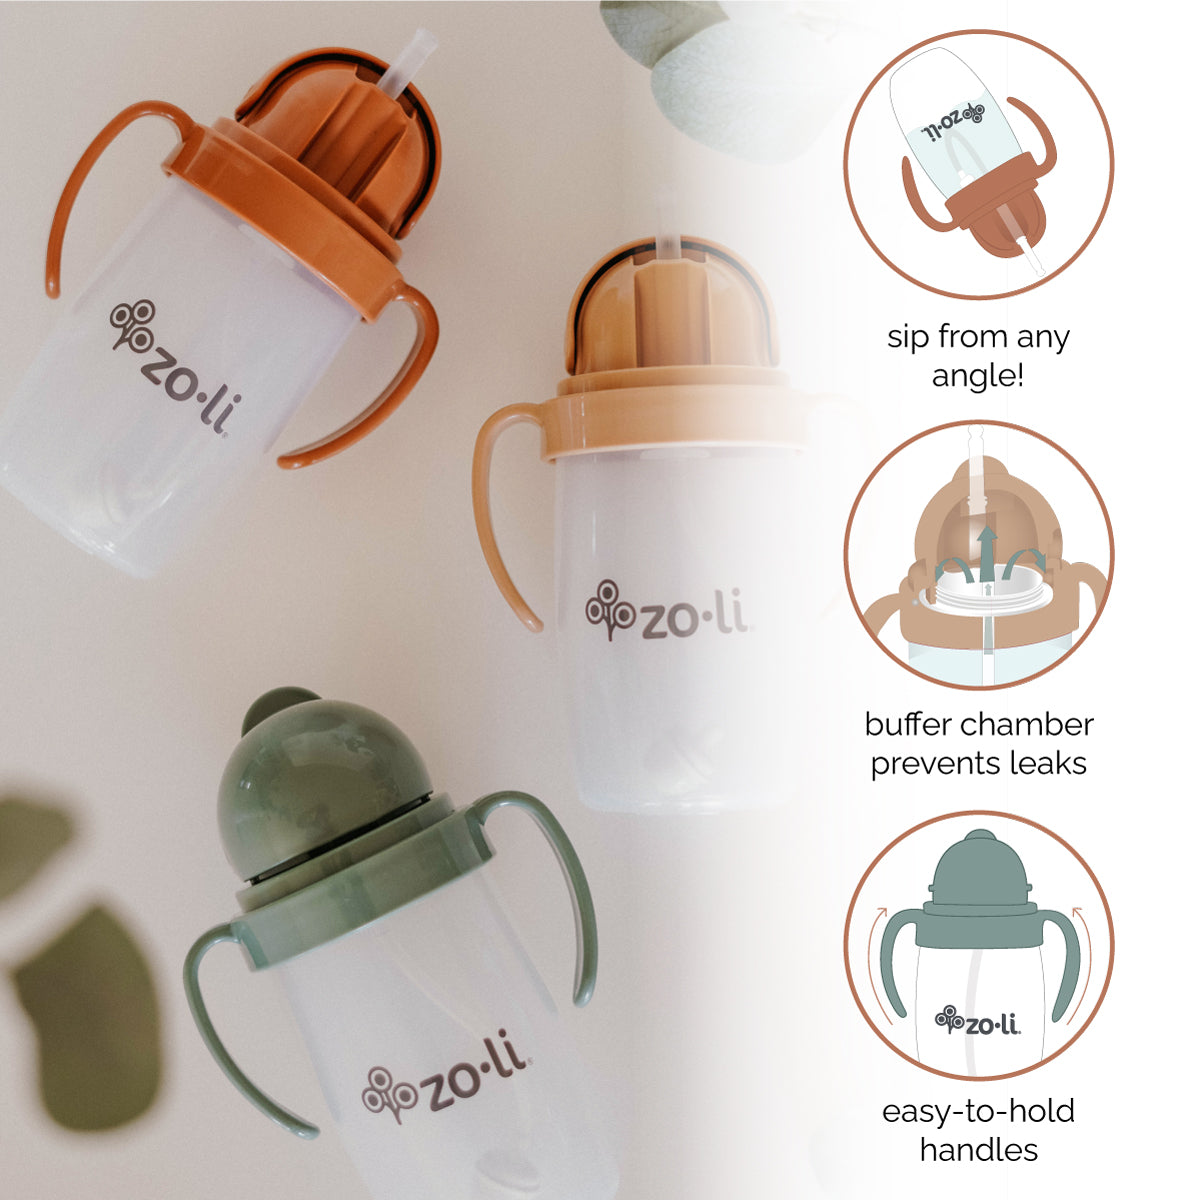 No More Drink Puddles With USA Kids Sippy Cups · Get It, Kids